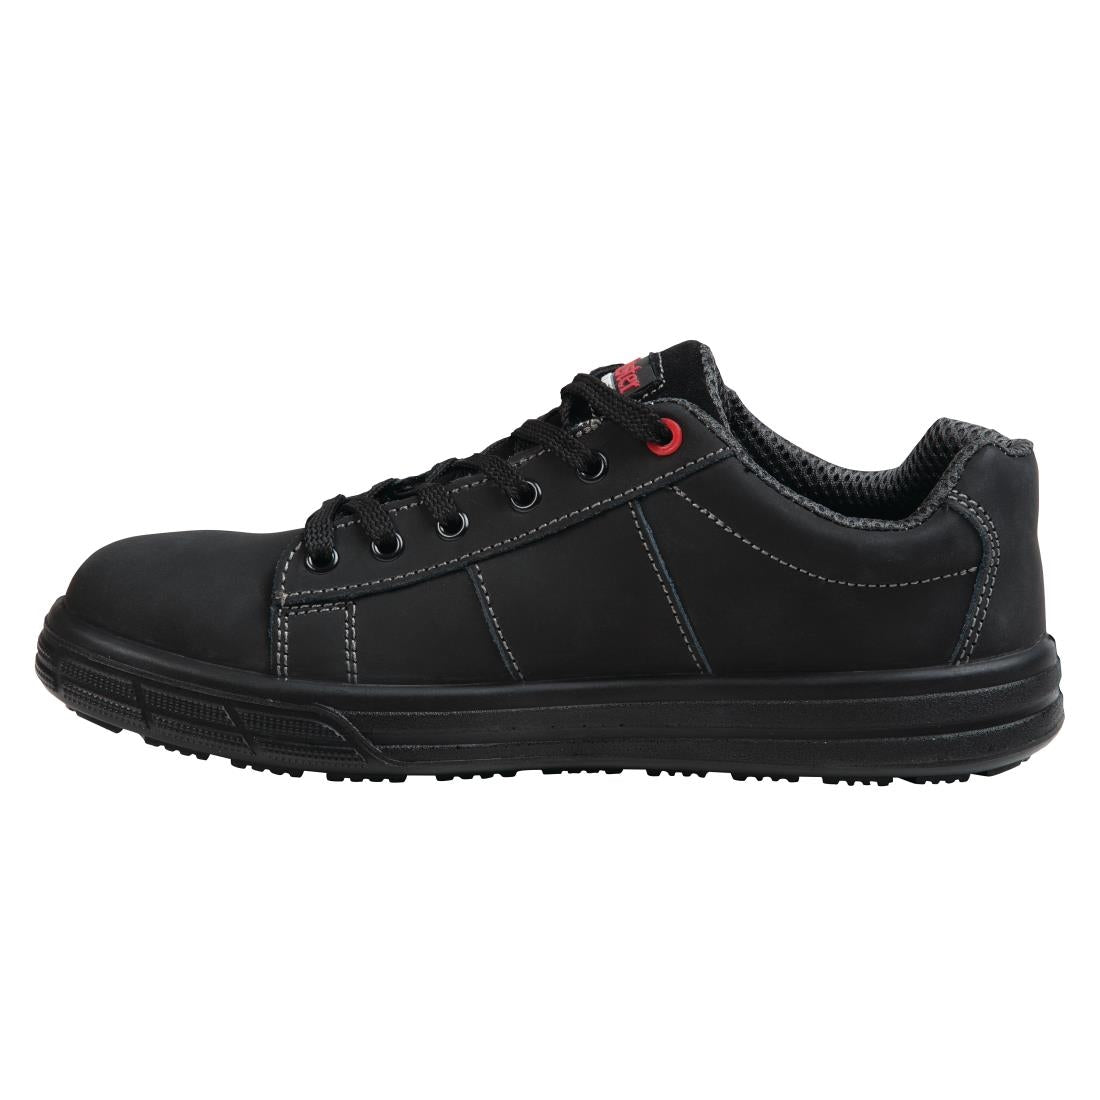 BB420-44 Slipbuster Safety Trainers Black 44